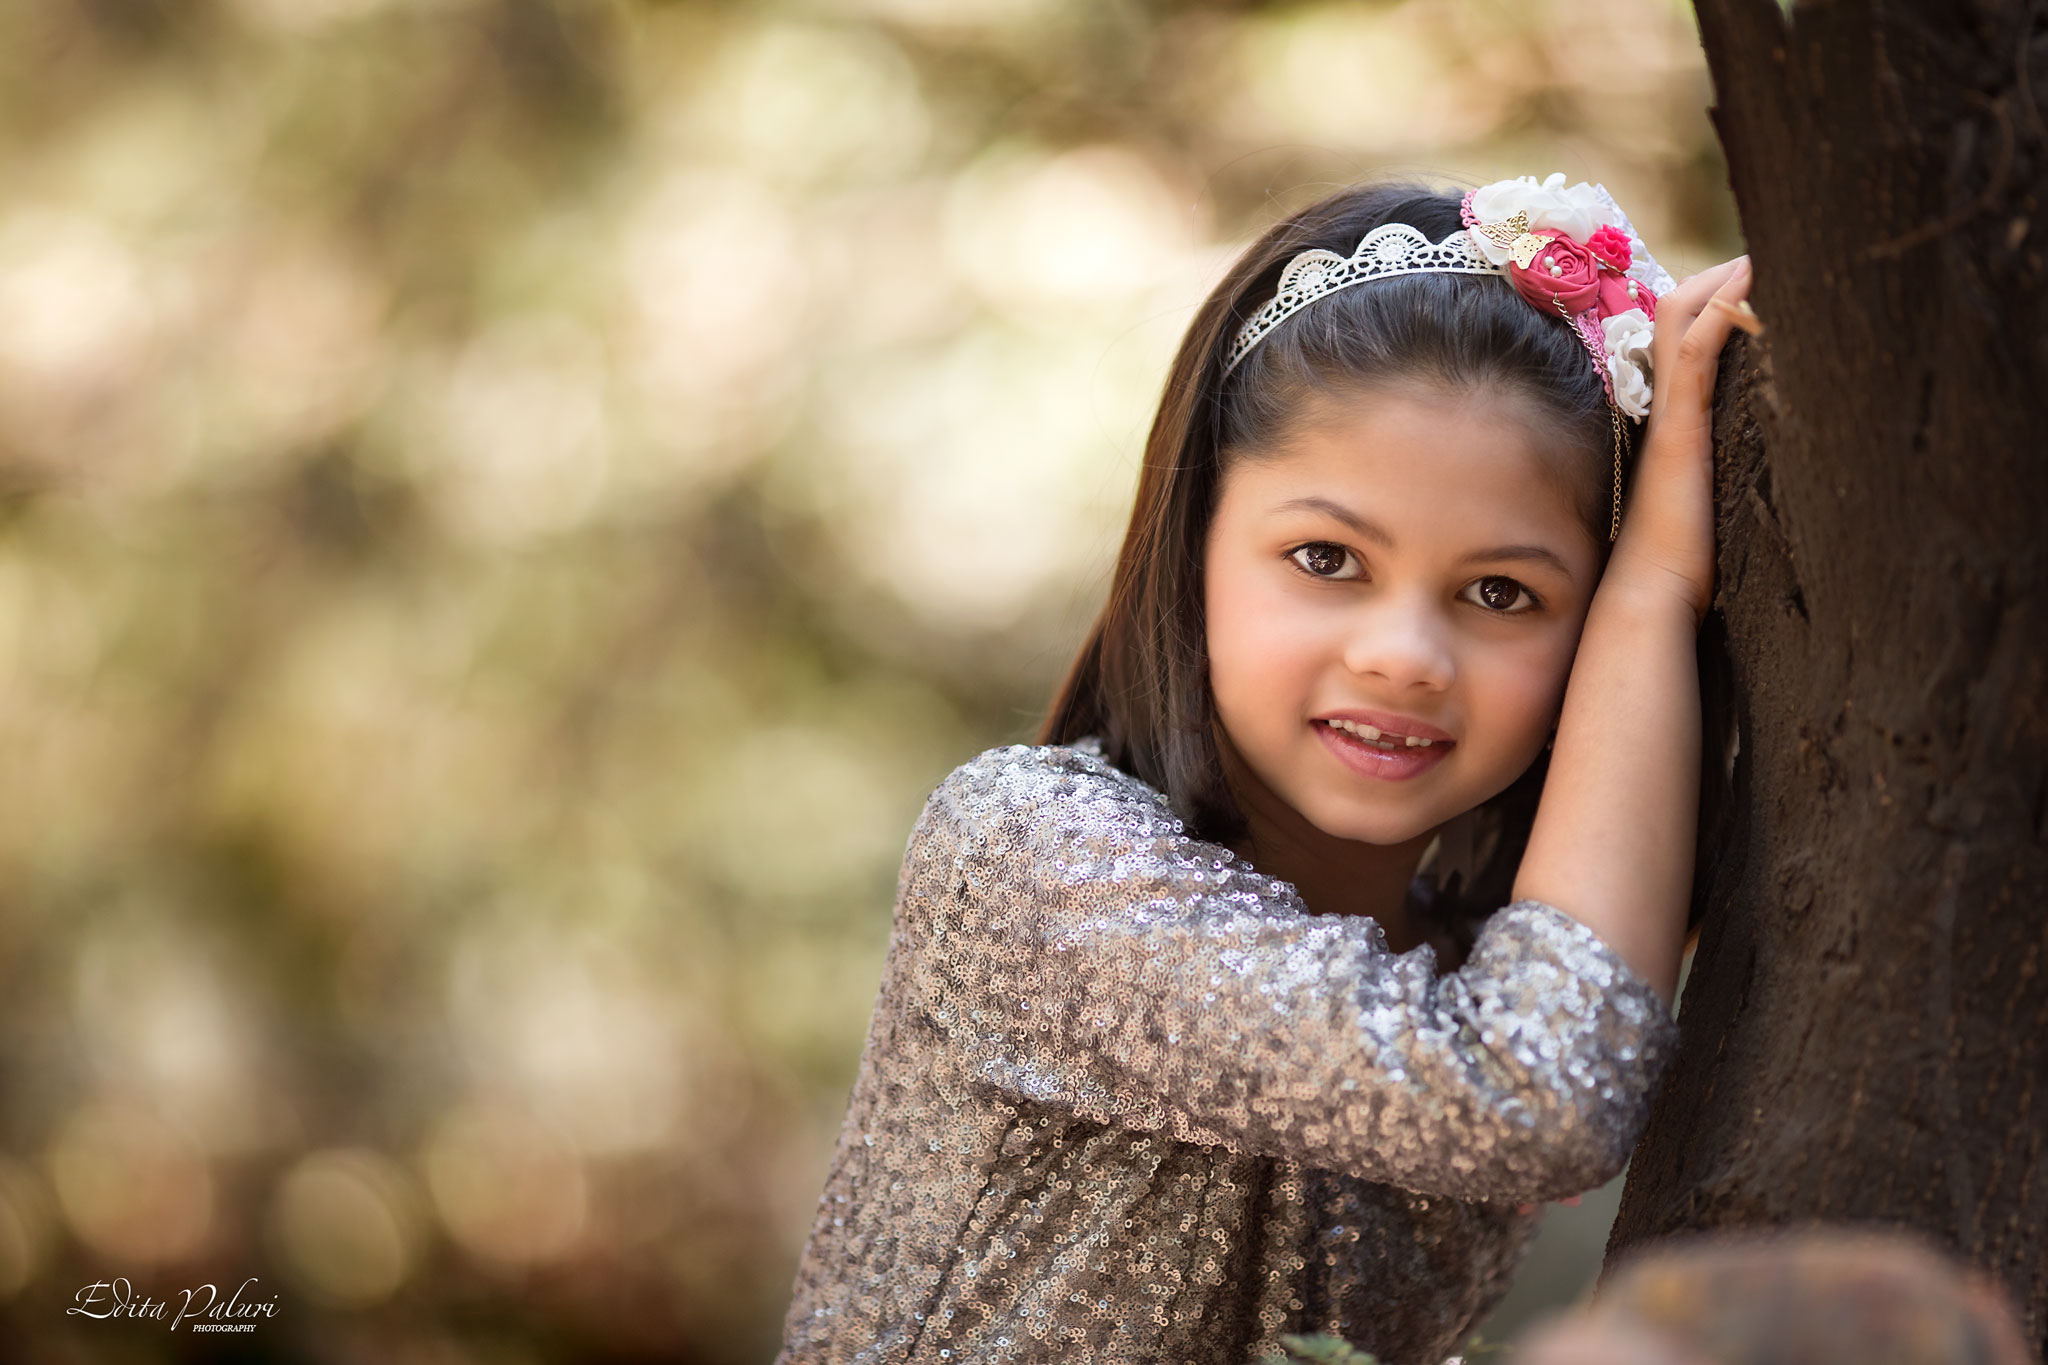 beautiful 8 year old girl photo session - child photographer in pune